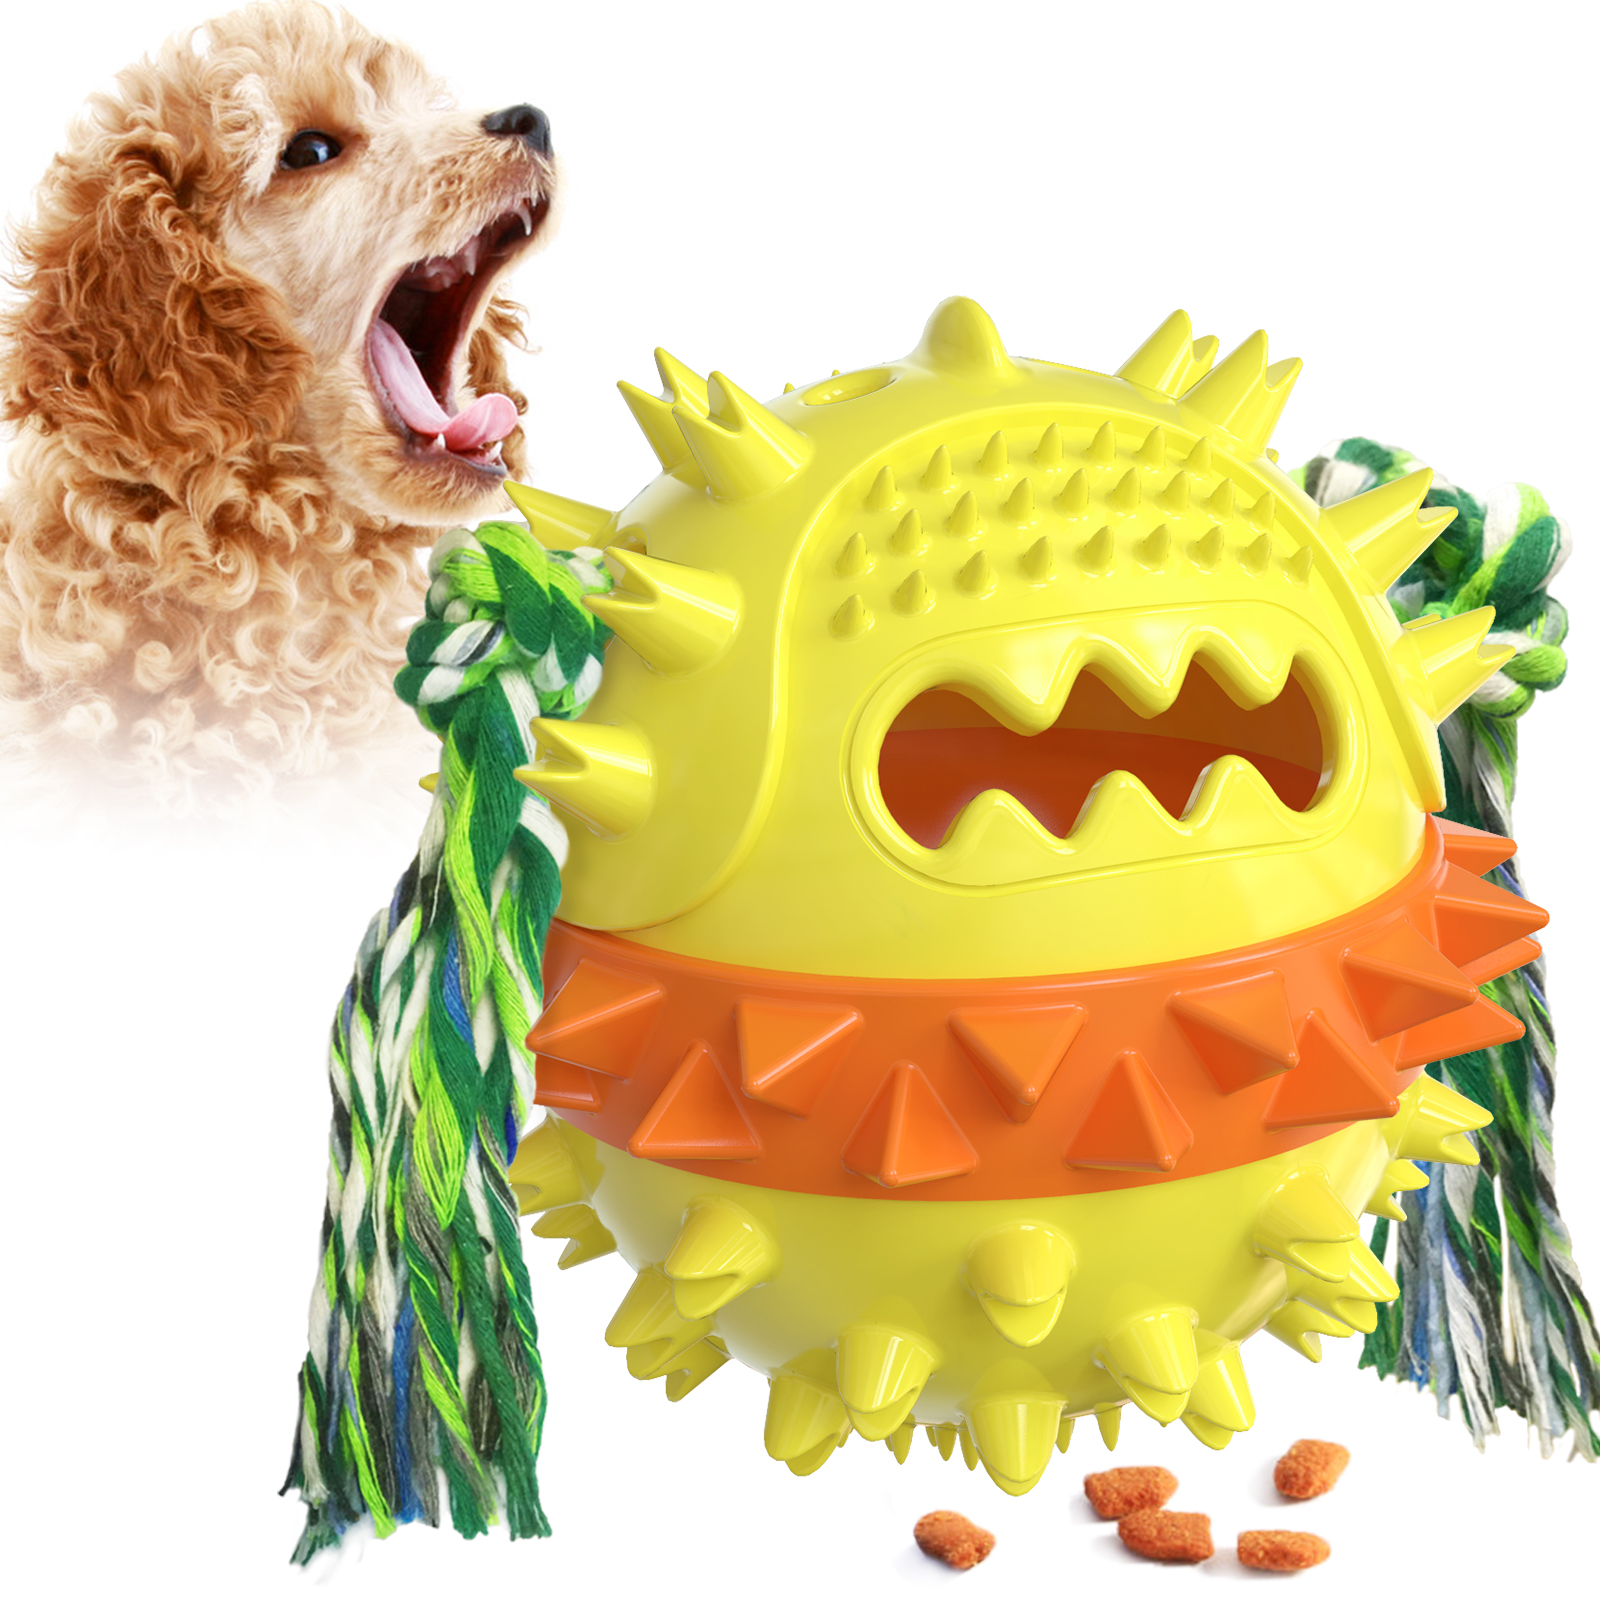 Dog Teeth Cleaning Molar Toy Swimming Interactive Dog Toy Leaking Ball Chewing Molar Toy